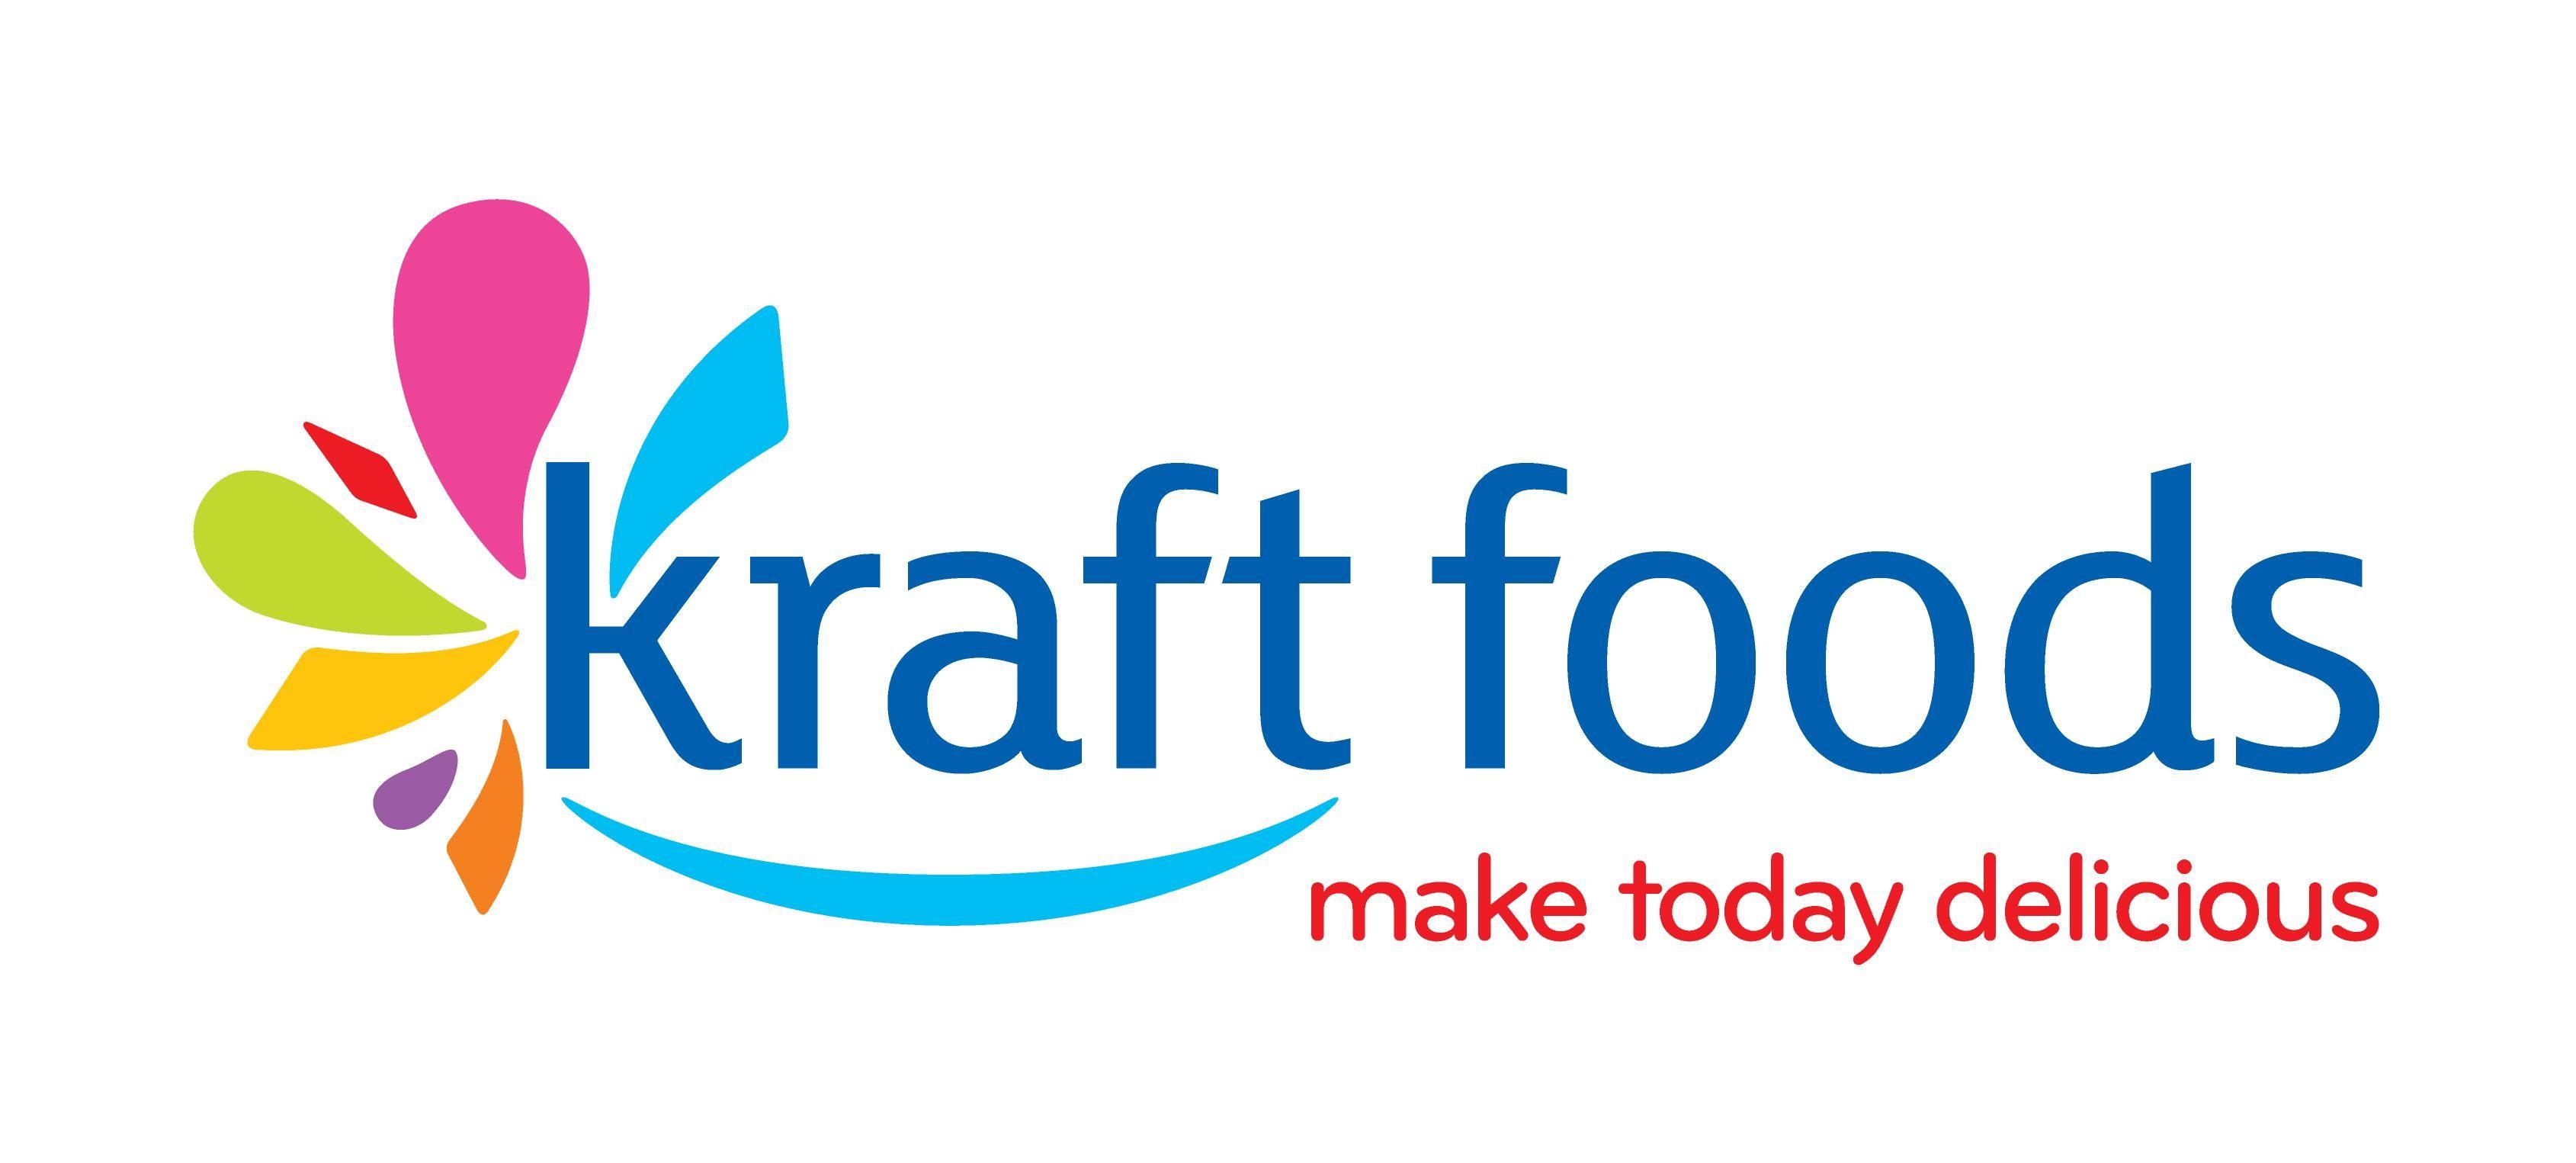 Kraft Foods Logo - Kraft Foods Dishes Out Its Recipe for Successful Content Marketing